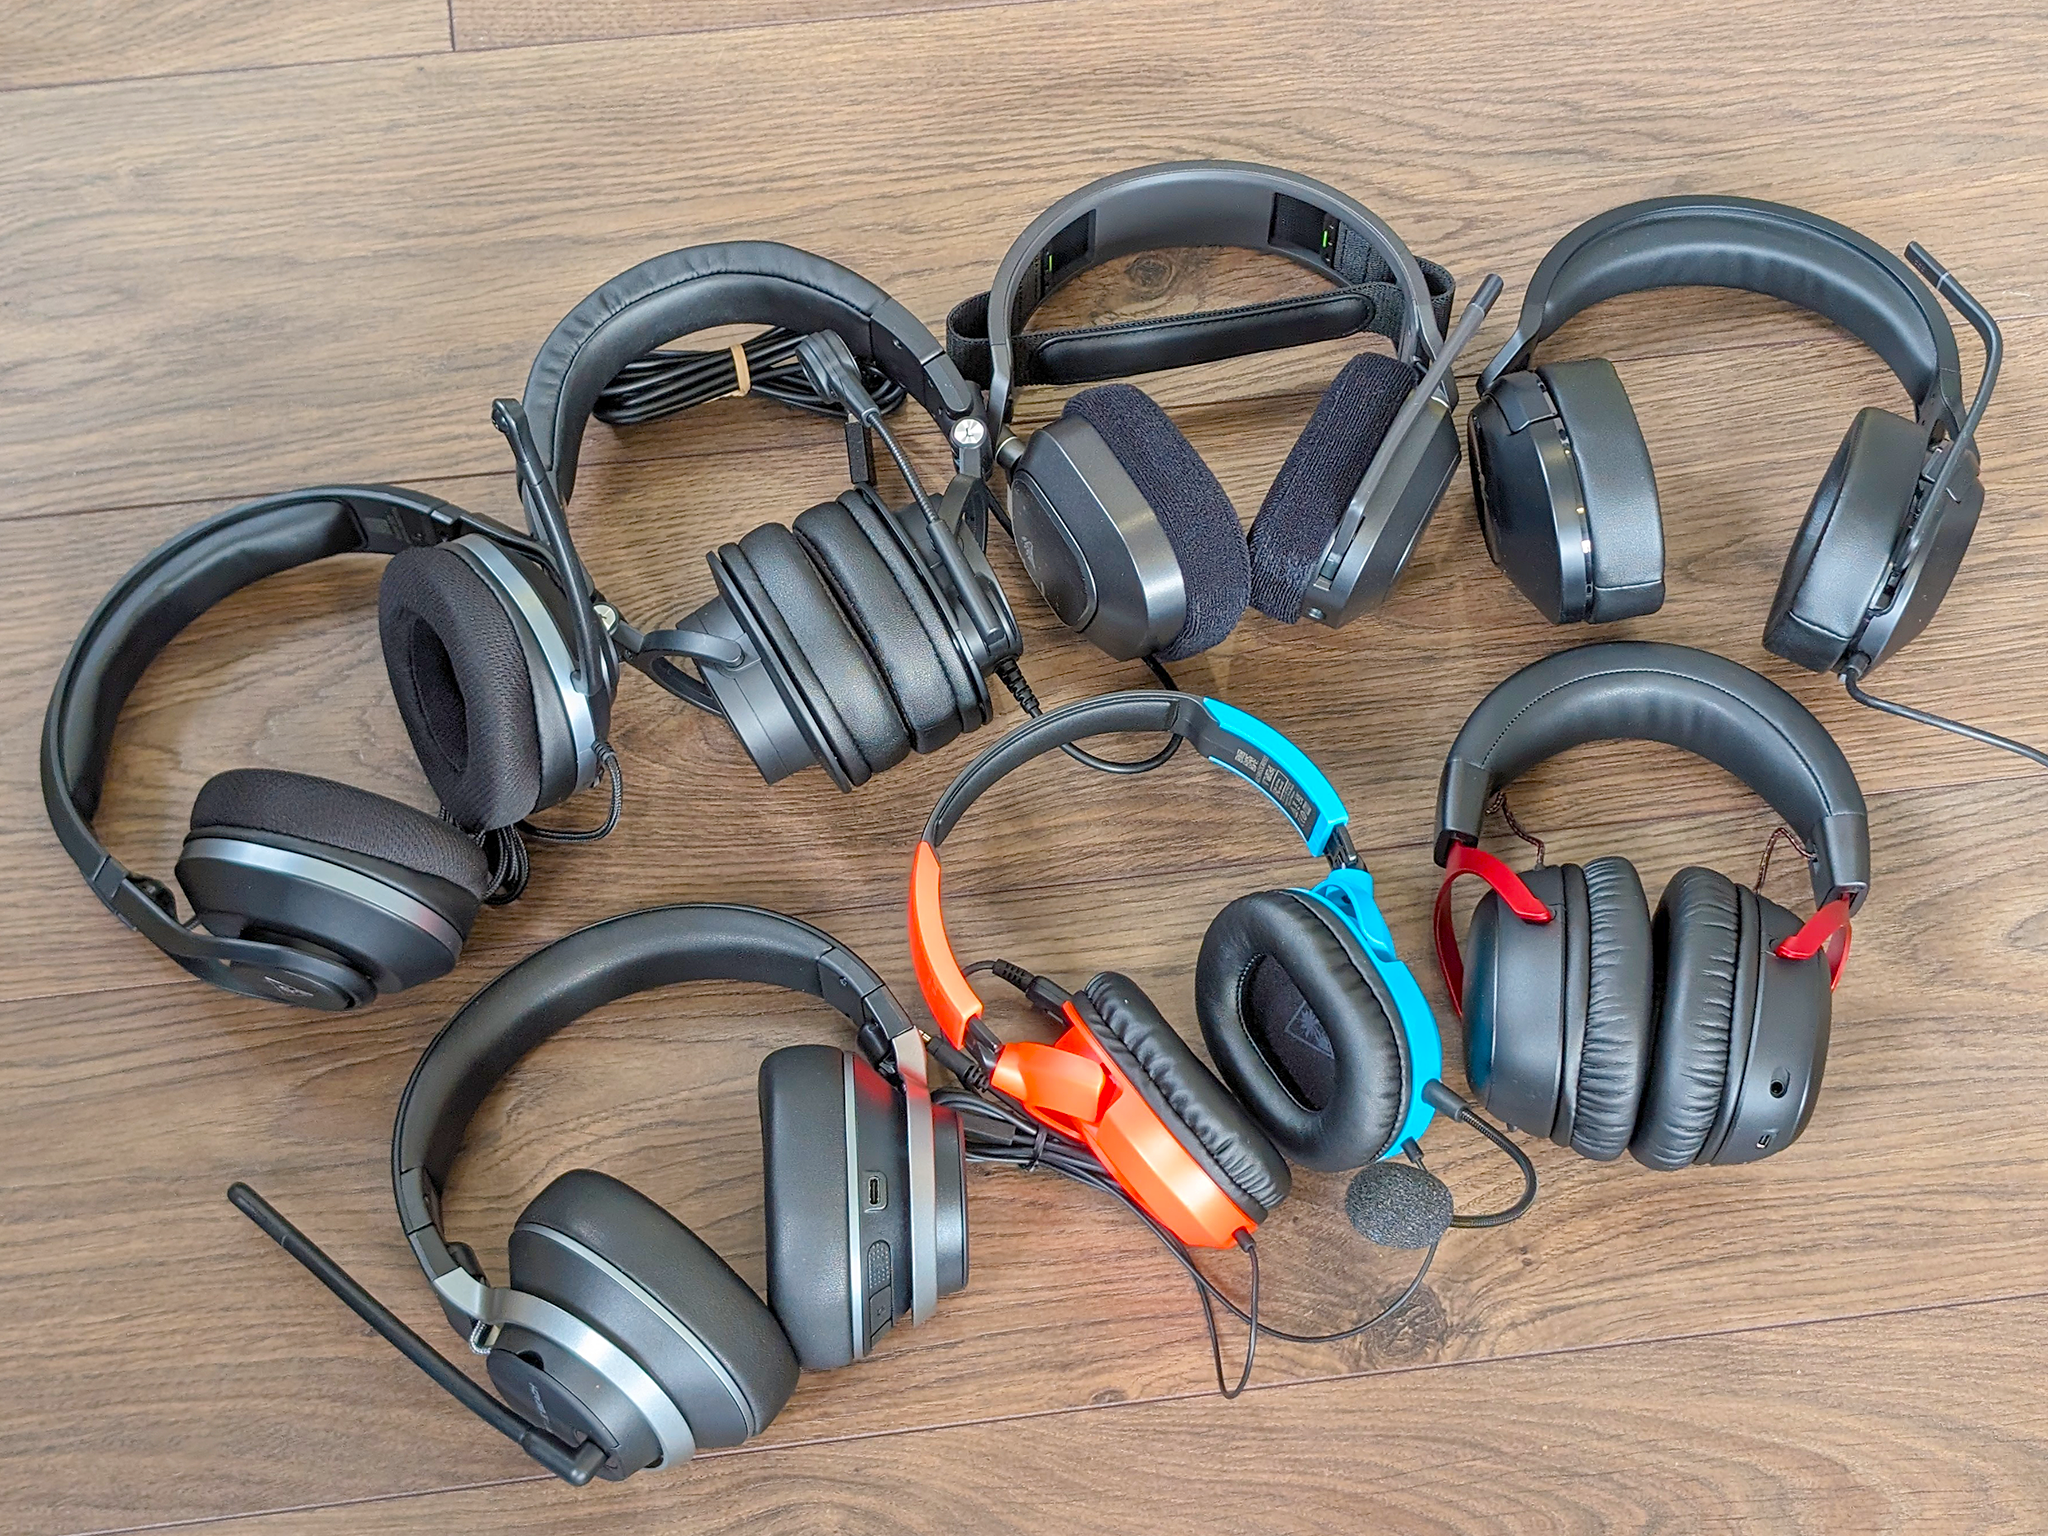 We tested a range of gaming headsets